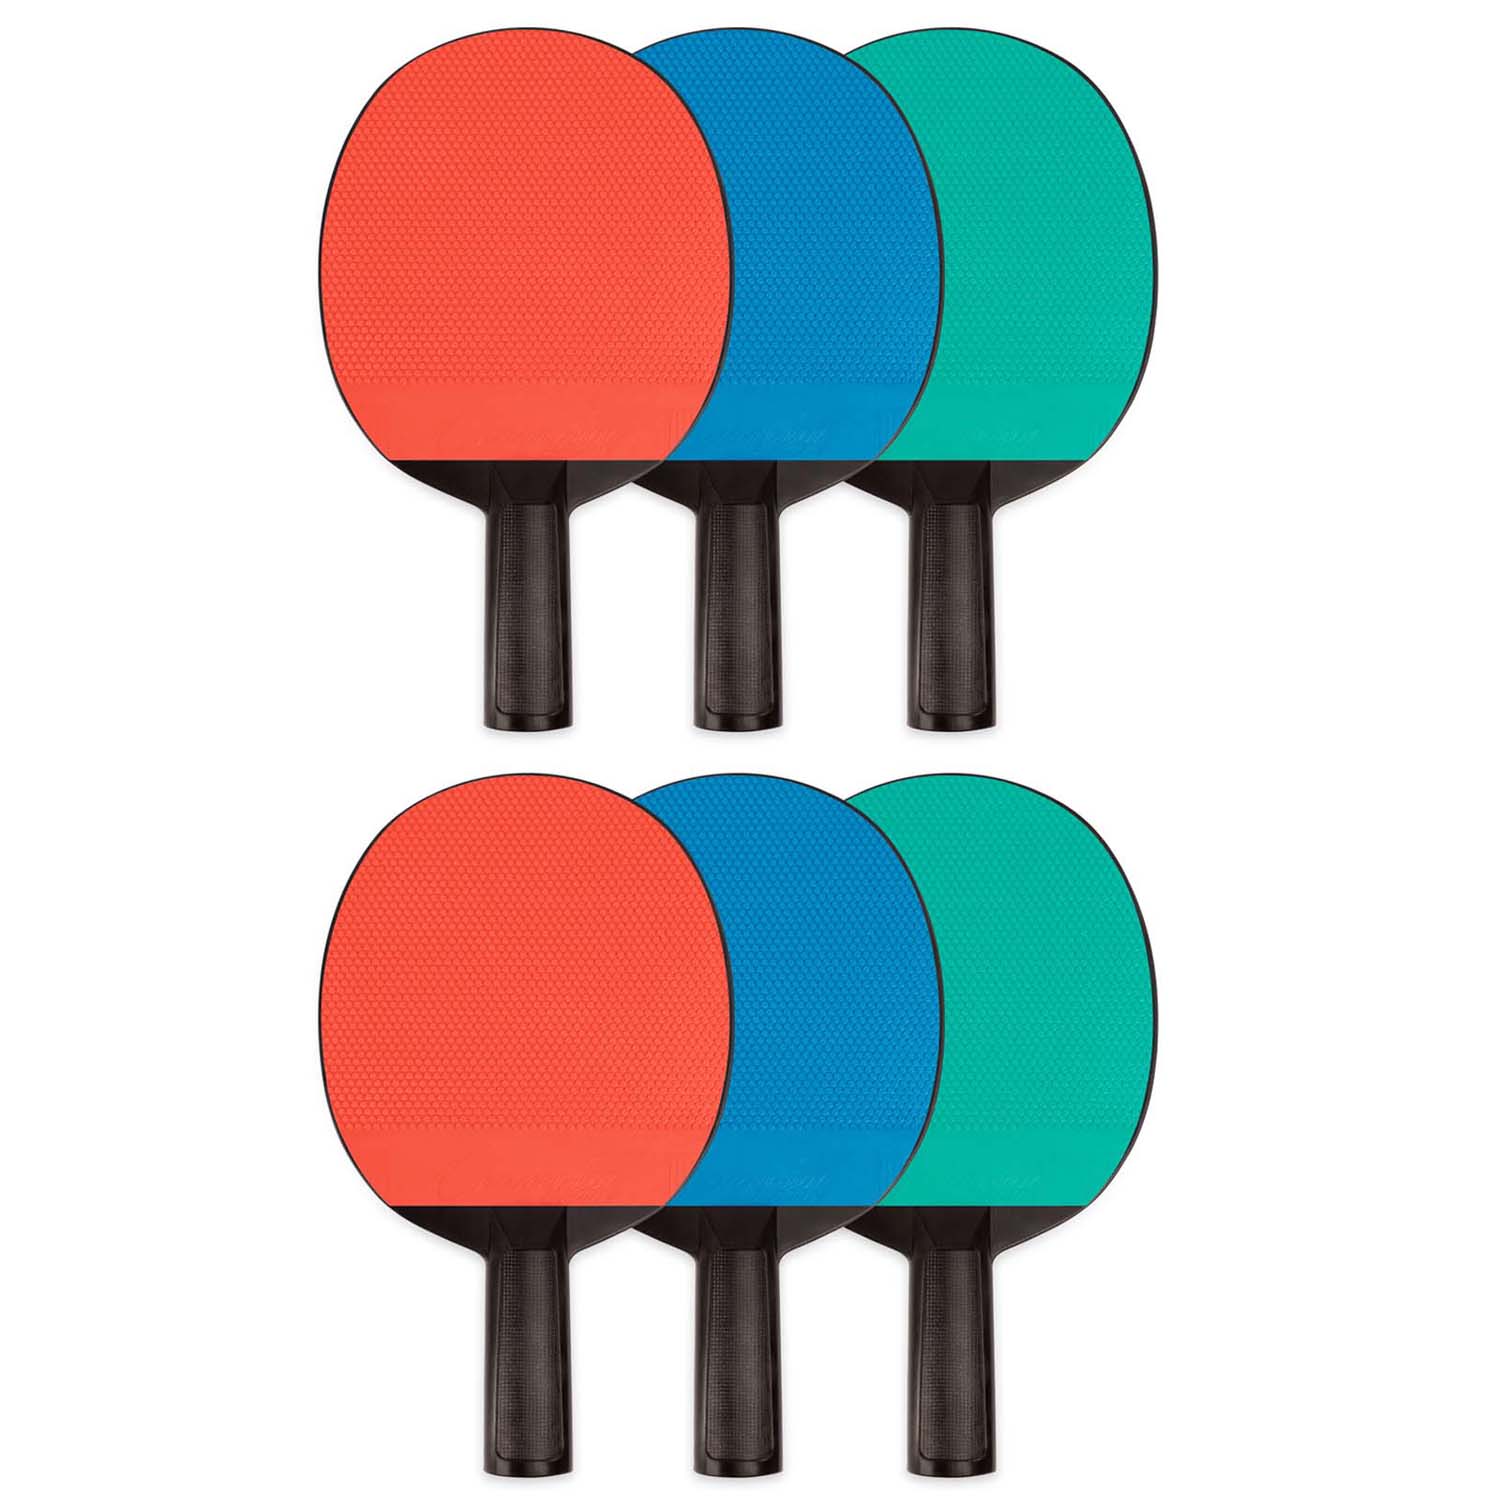 Plastic Rubber Face Table Tennis Paddle, Pack of 6